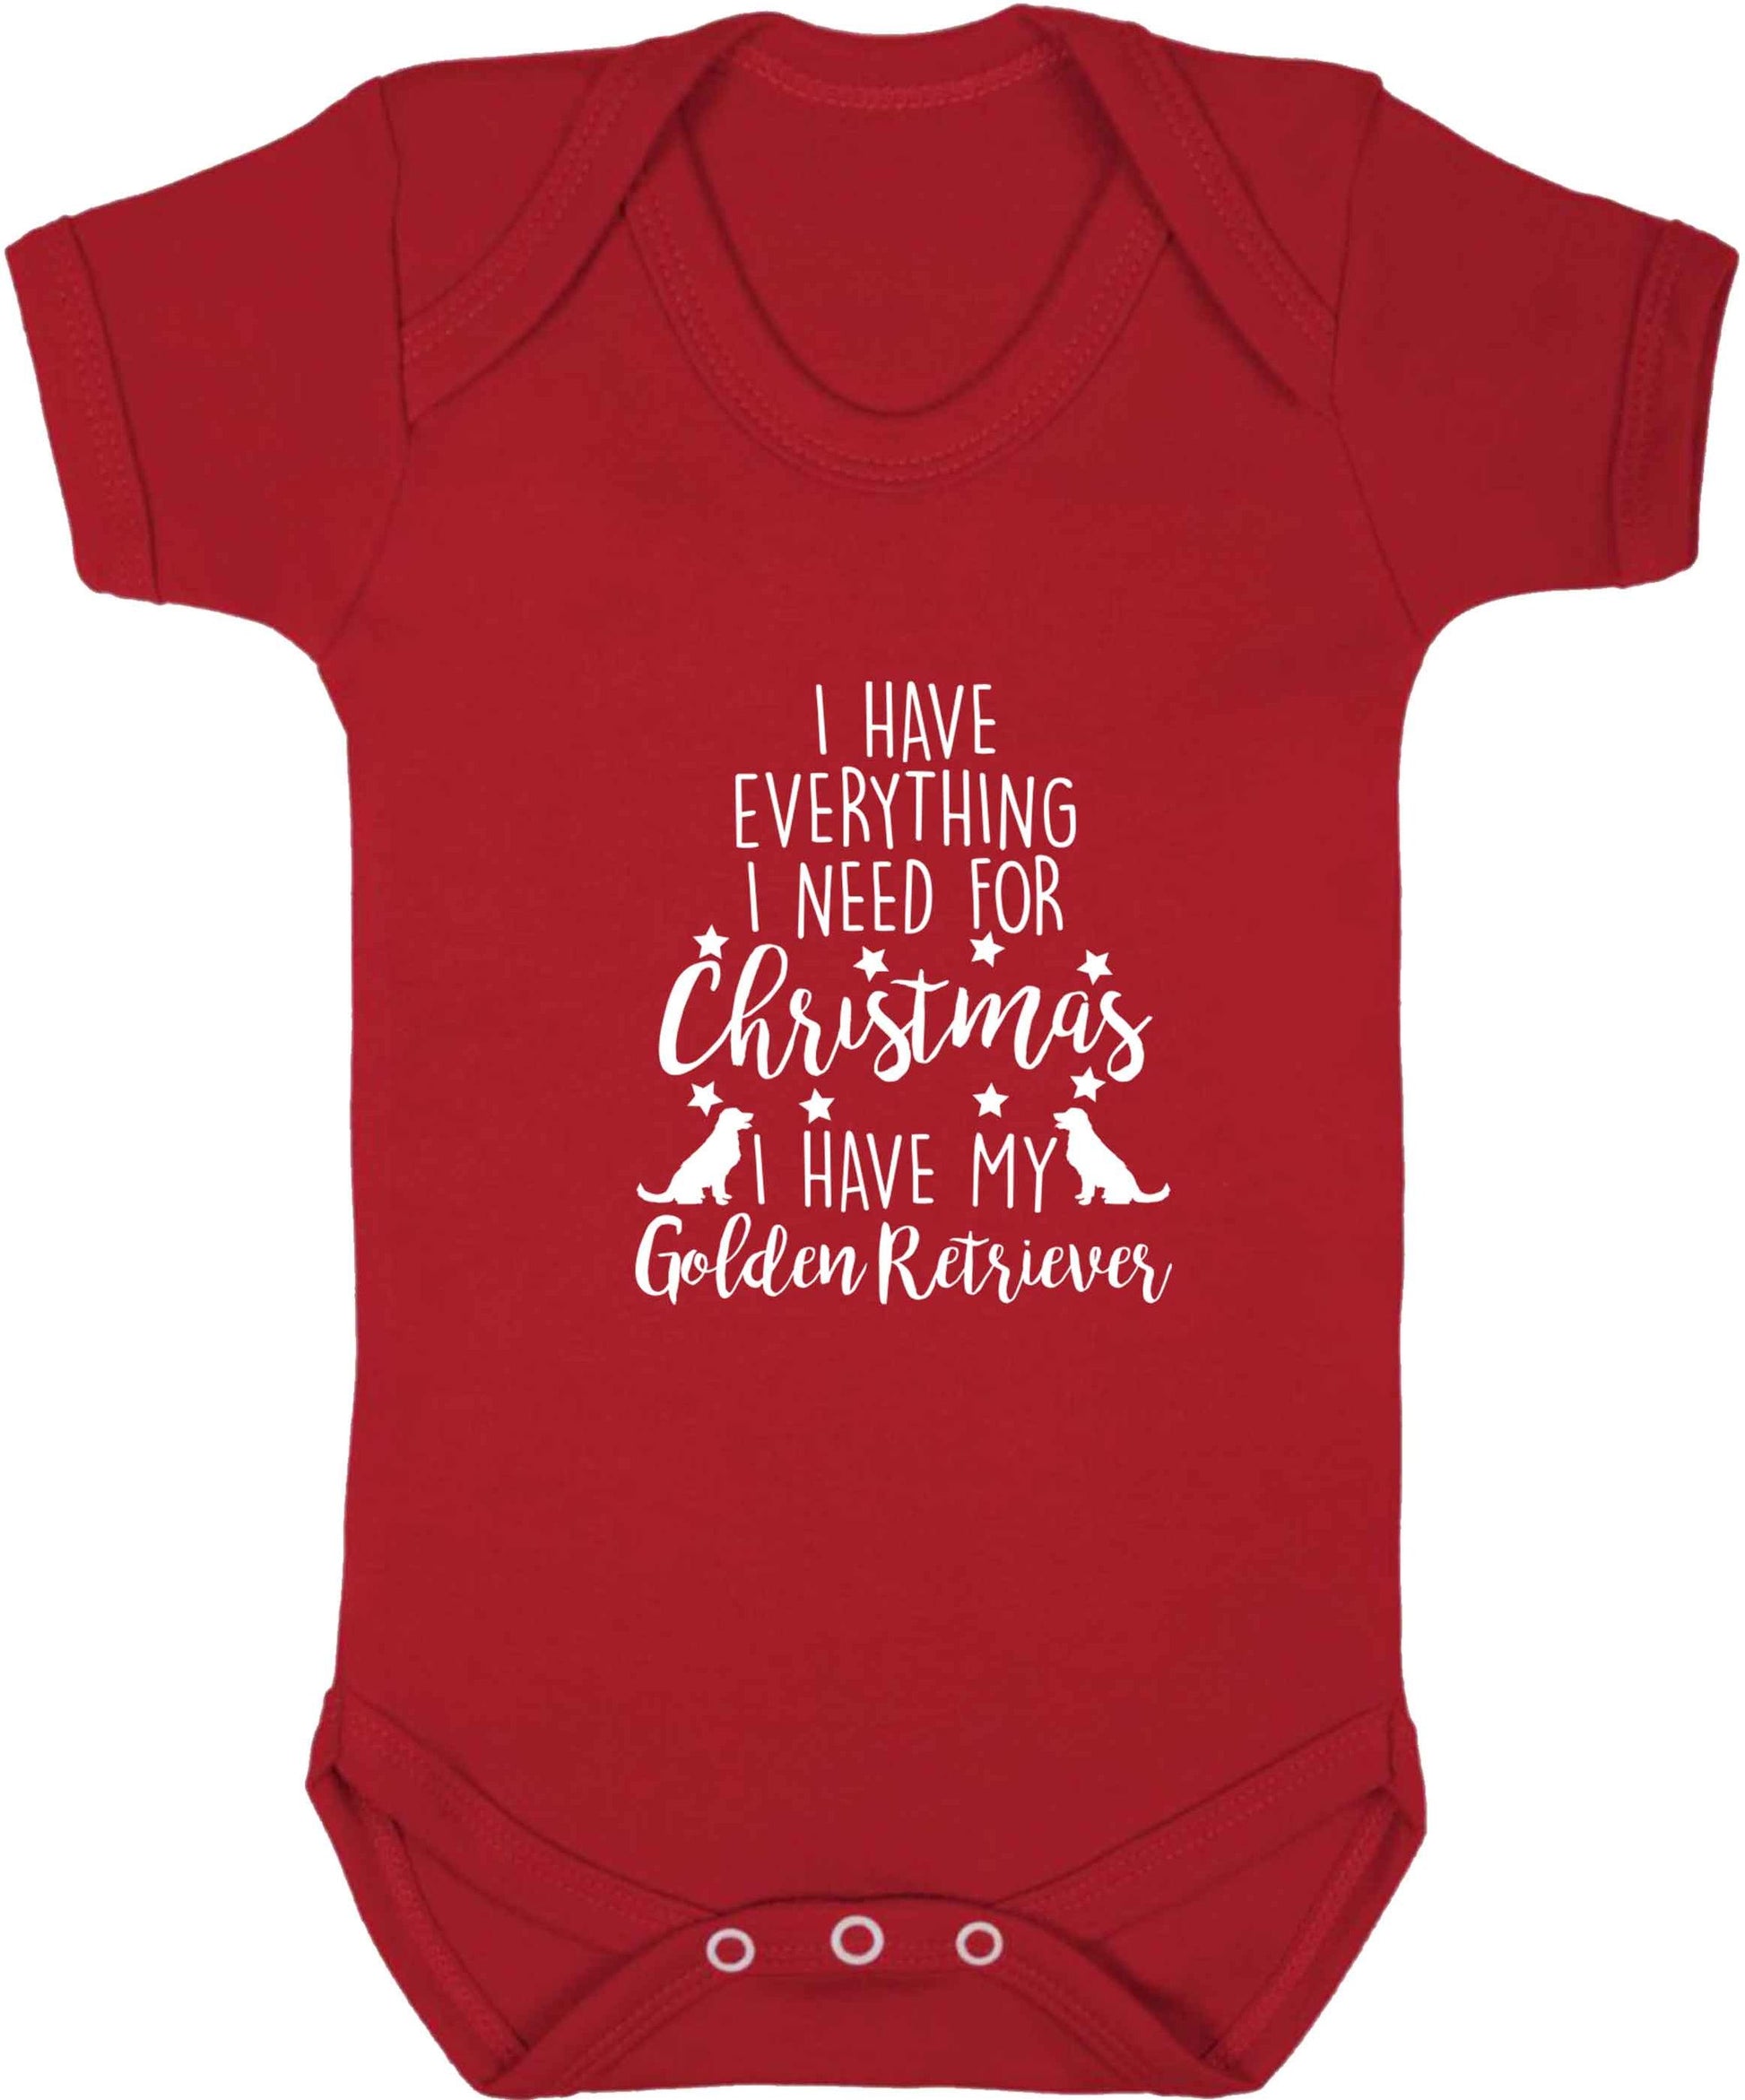 I have everything I need for Christmas I have my golden retriever baby vest red 18-24 months